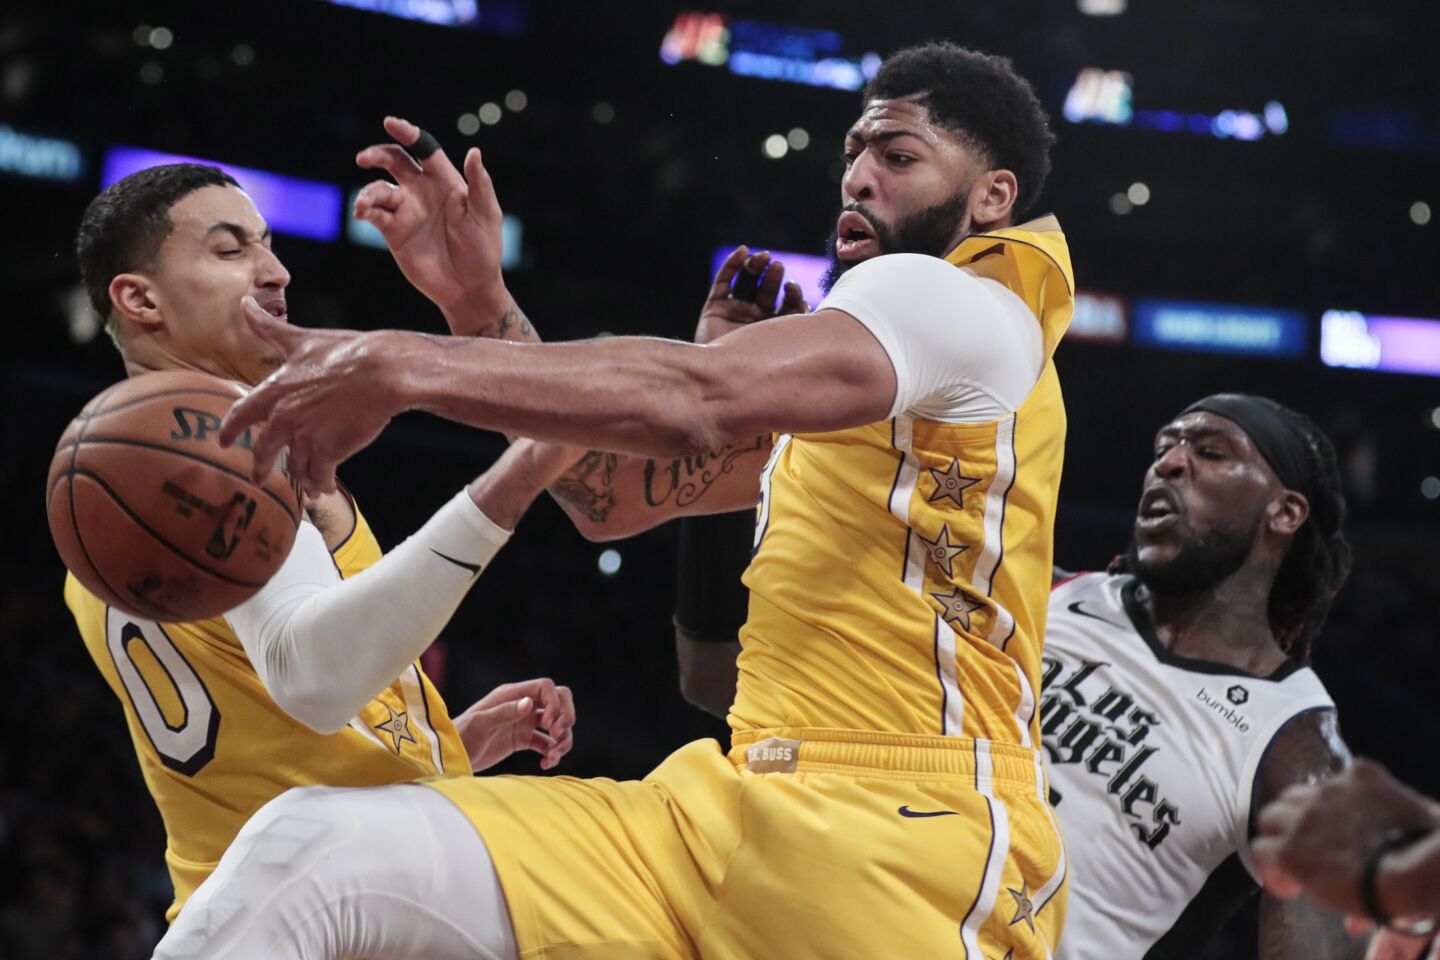 Lakers forwards Kyle Kuzma (0) and Anthony Davis battle Clippers center Montrezl Harrell for a rebound during the second half.